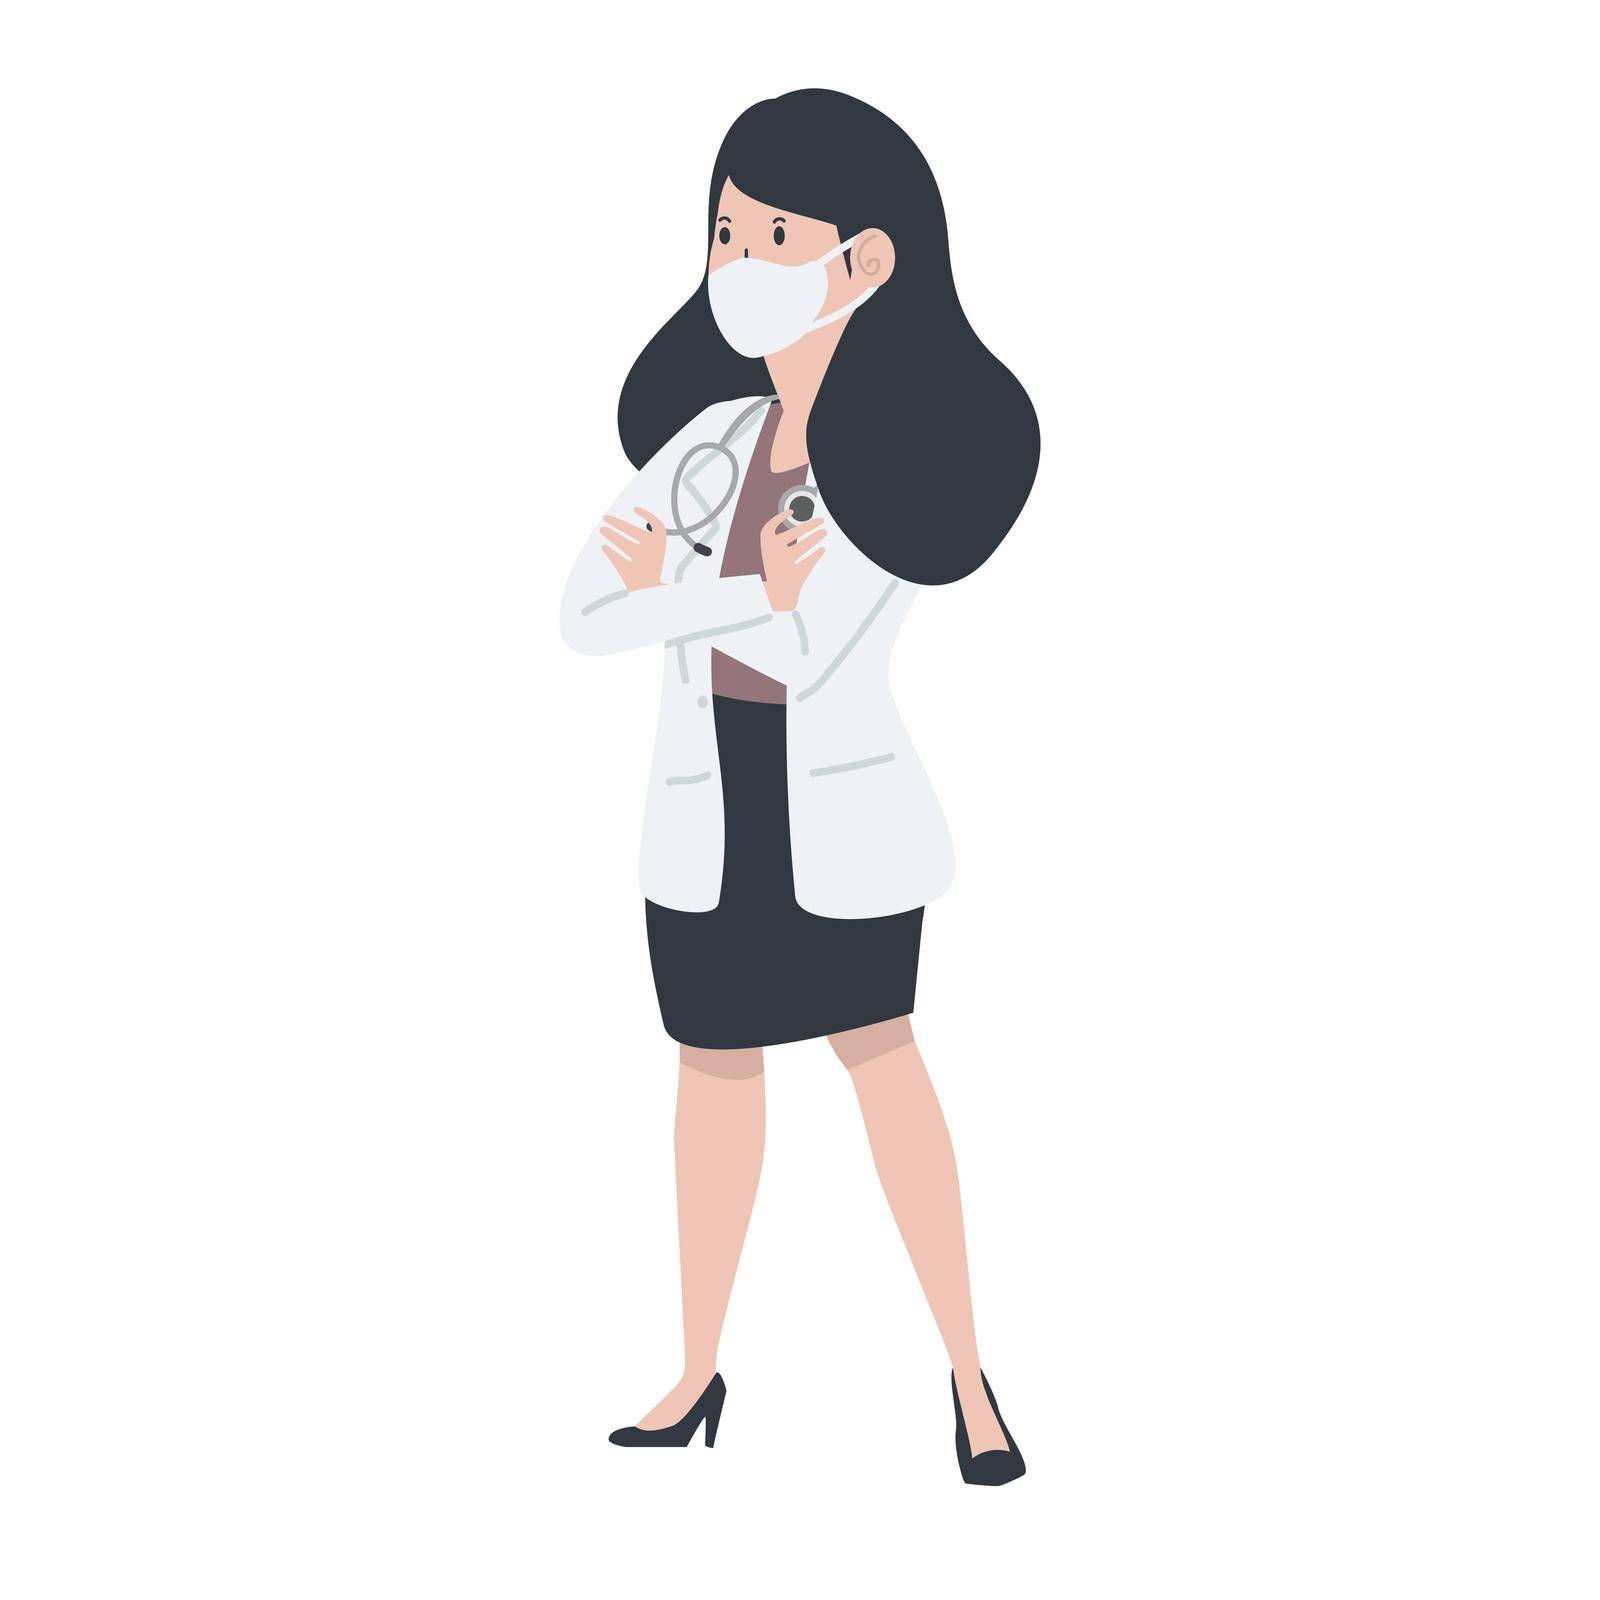 Female doctor  poses cartoon character vector